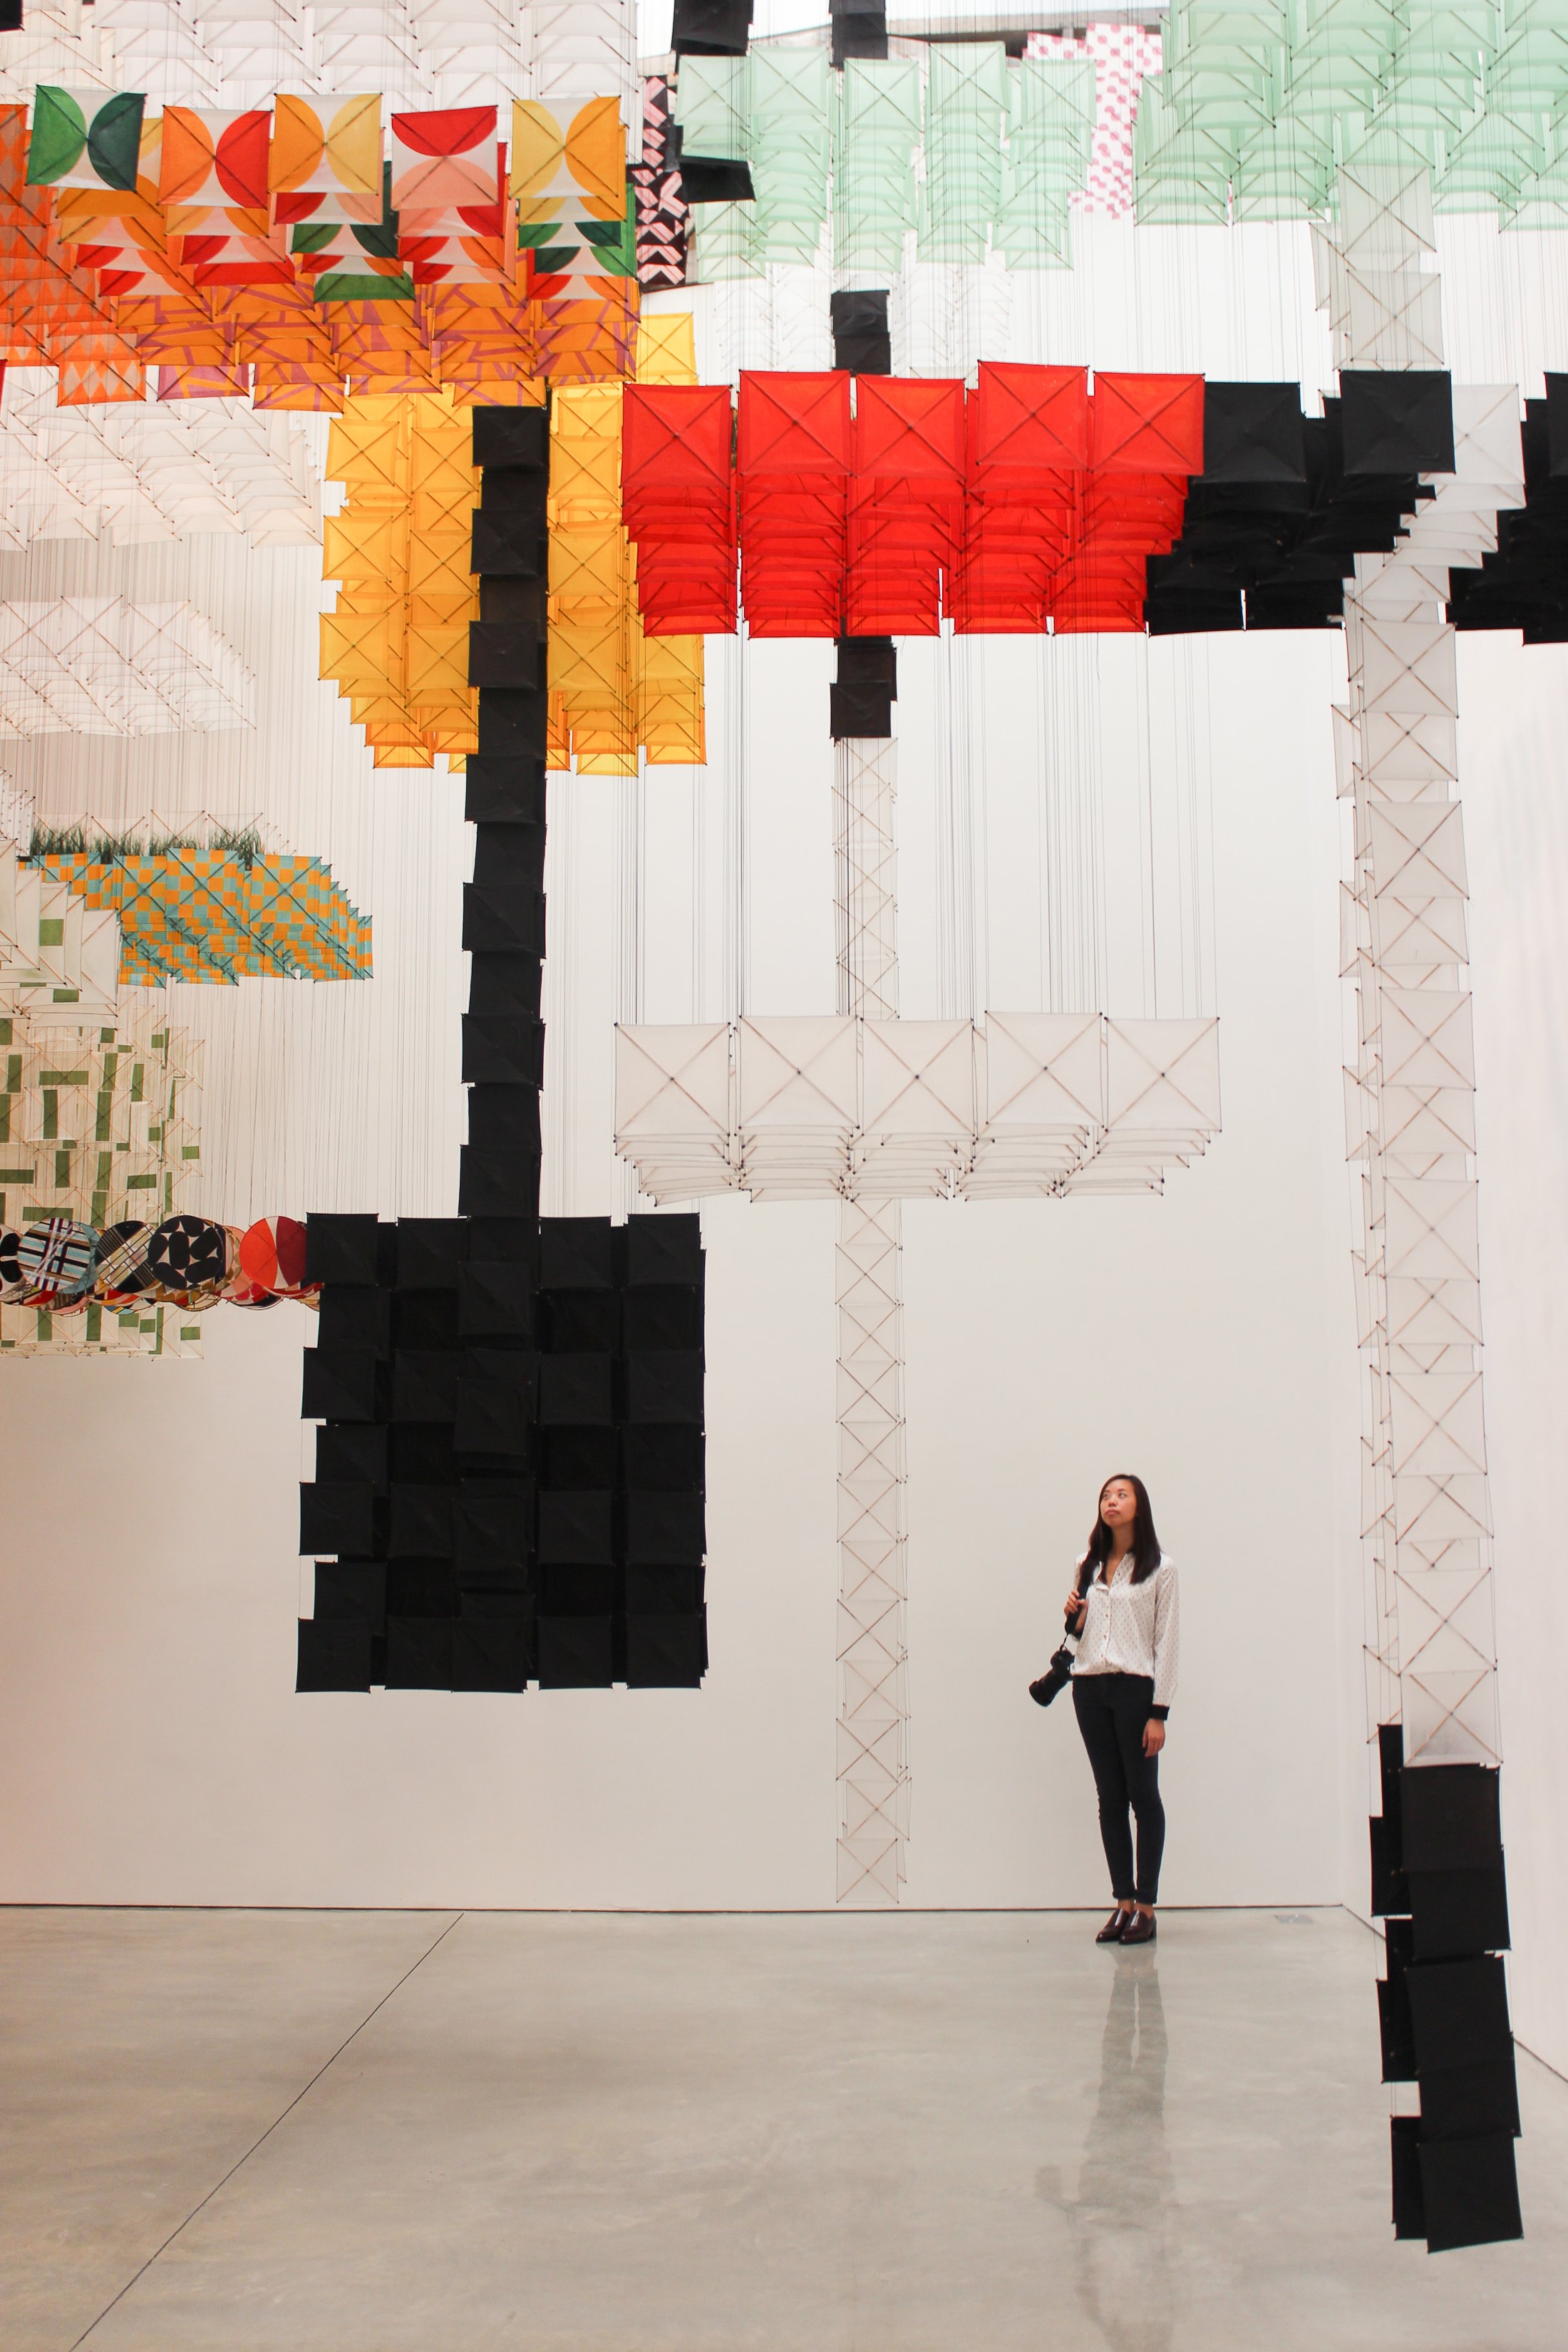 Jacob Hashimoto Sky Farm Fortress Mary Boone gallery Chelsea Galleries art artist kite installation shershegoes.com sher she goes